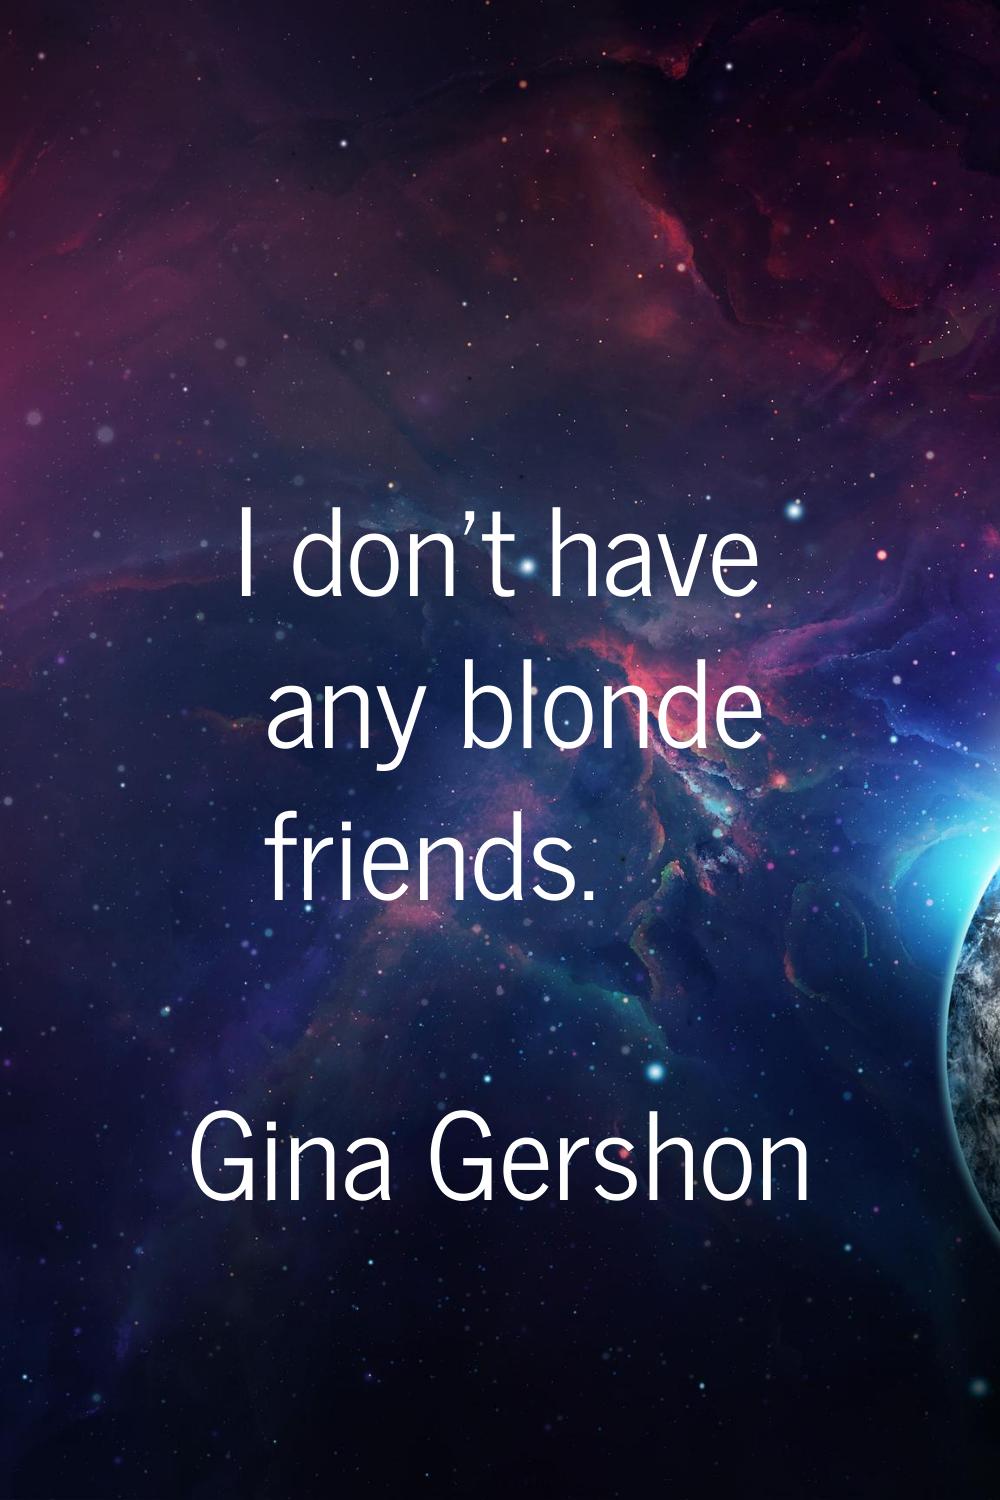 I don't have any blonde friends.